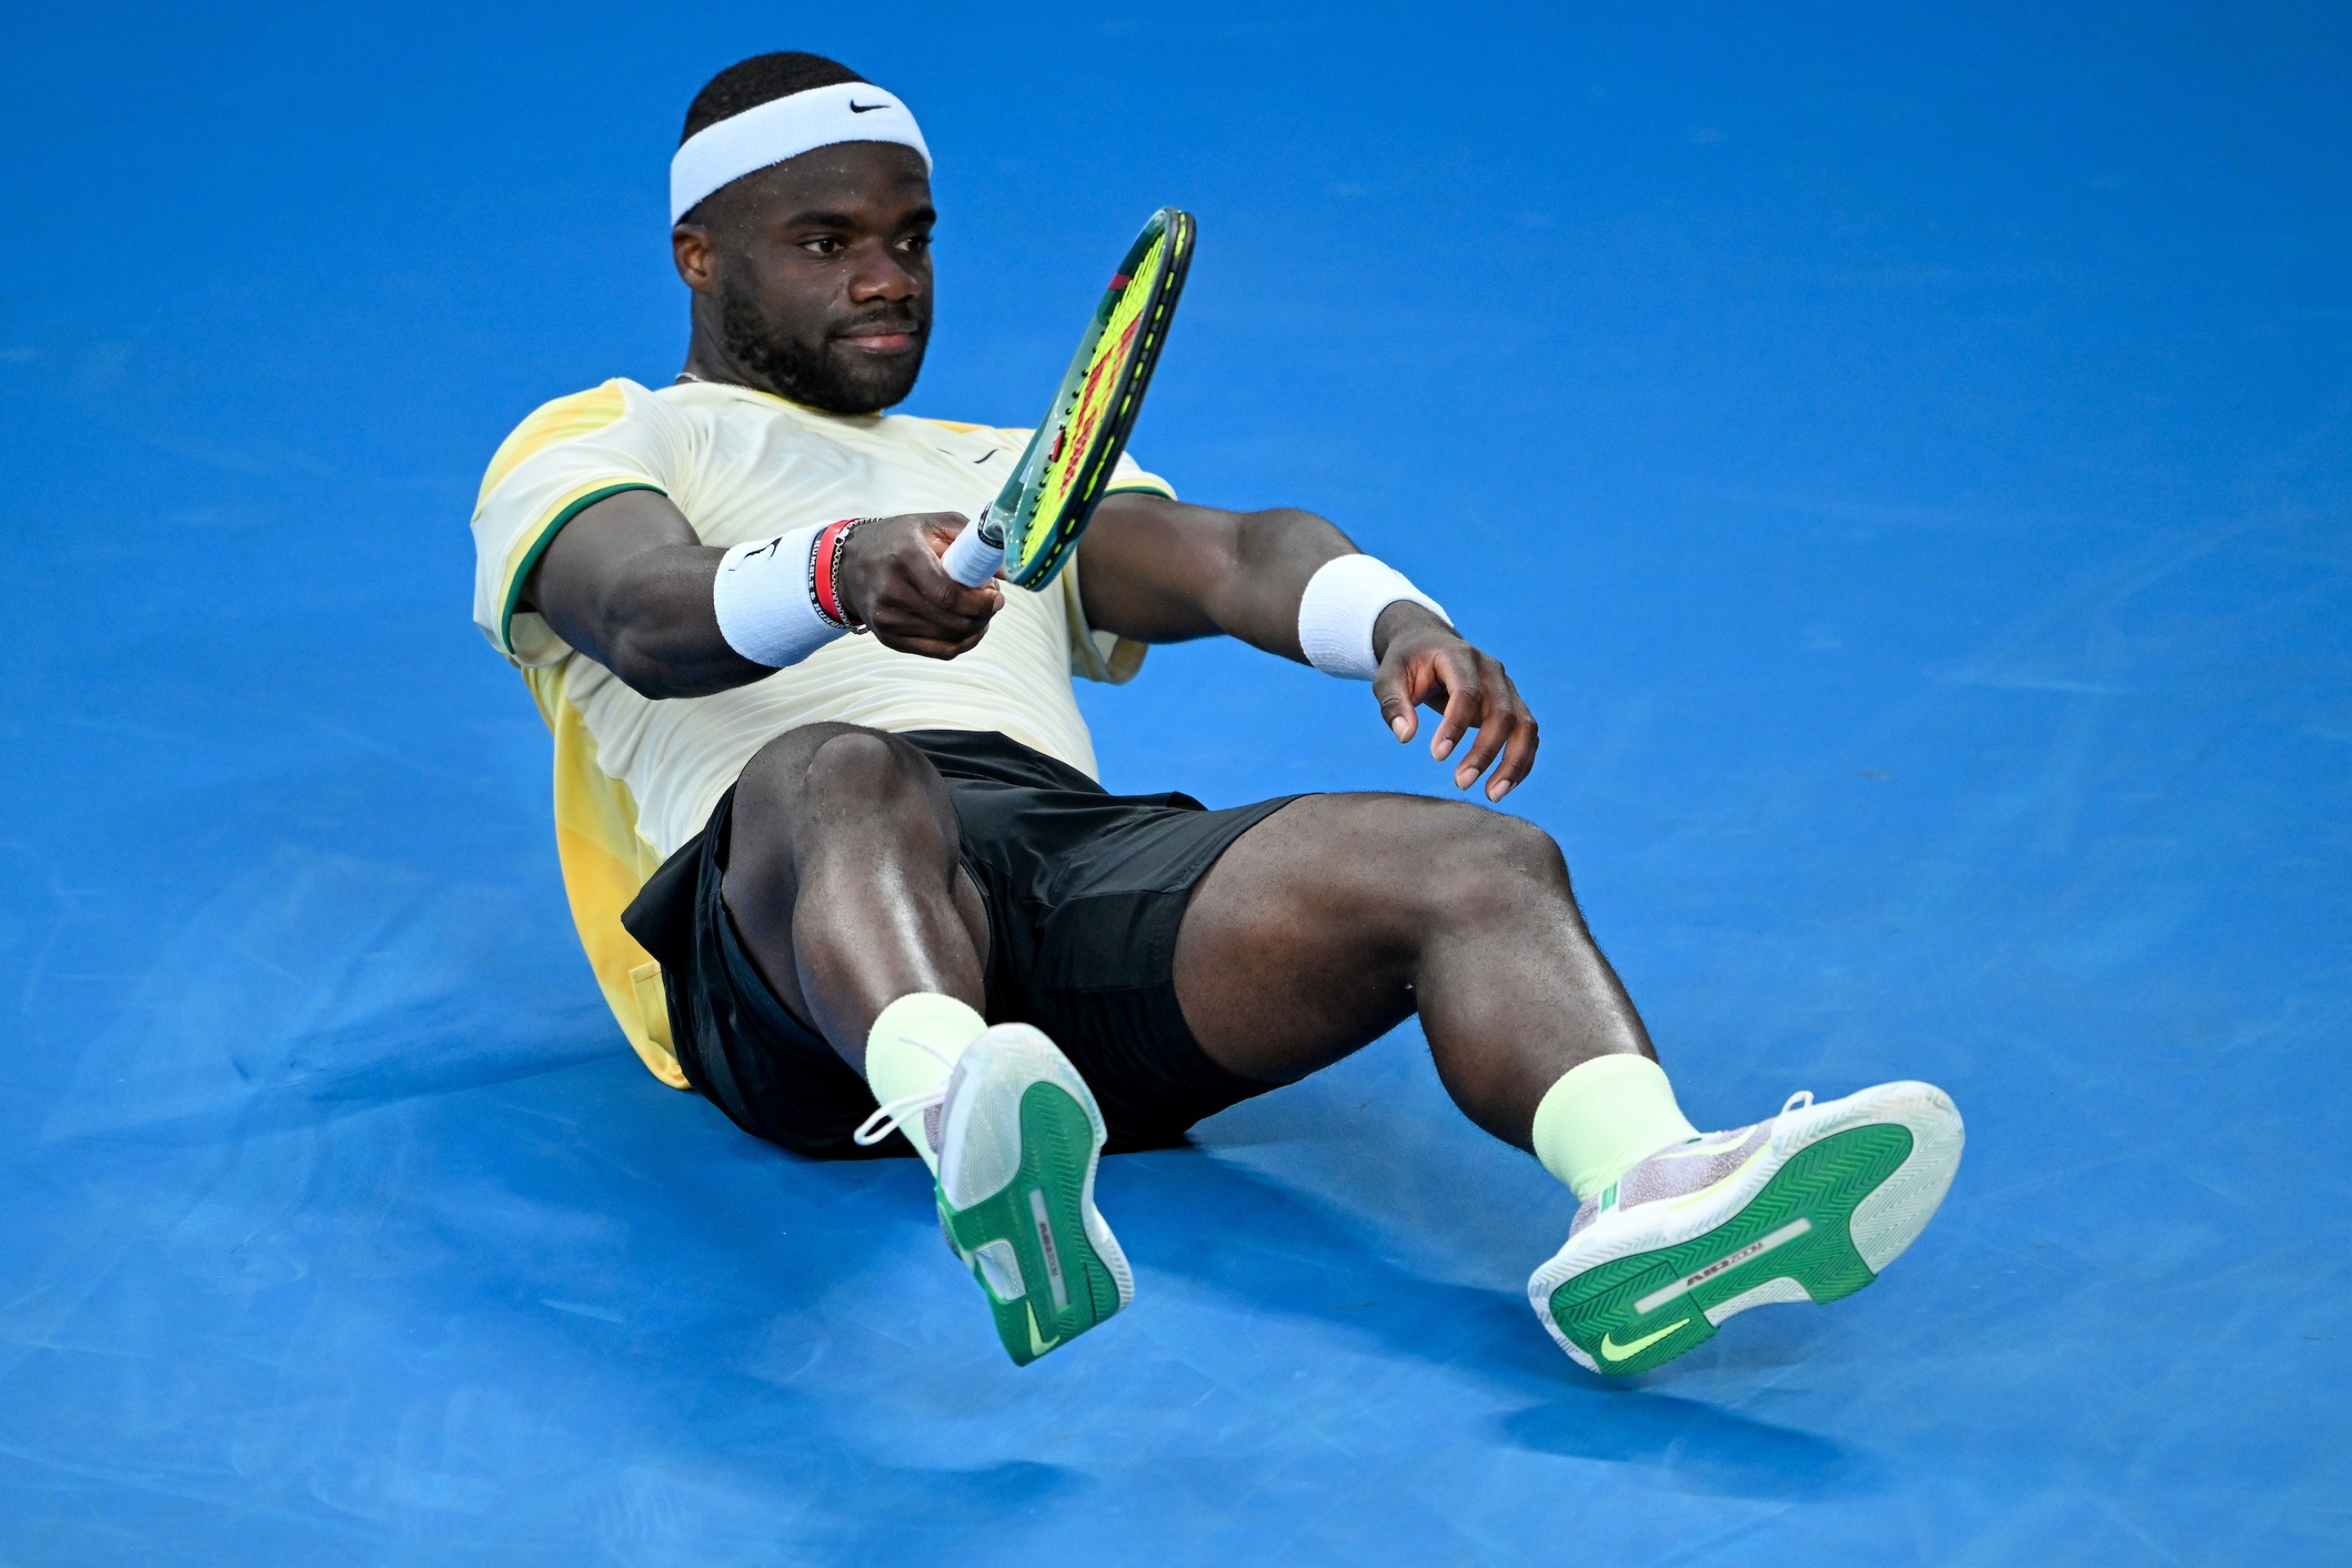 MELBOURNE, AUSTRALIA - JANUARY 17: Frances Tiafoe of the United States falls to ground in the round two men's singles match against Tomas Machac of the Czech Republic during the 2024 Australian Open at Melbourne Park on January 17, 2024 in Melbourne, Australia. (Photo by Will Murray/Getty Images)